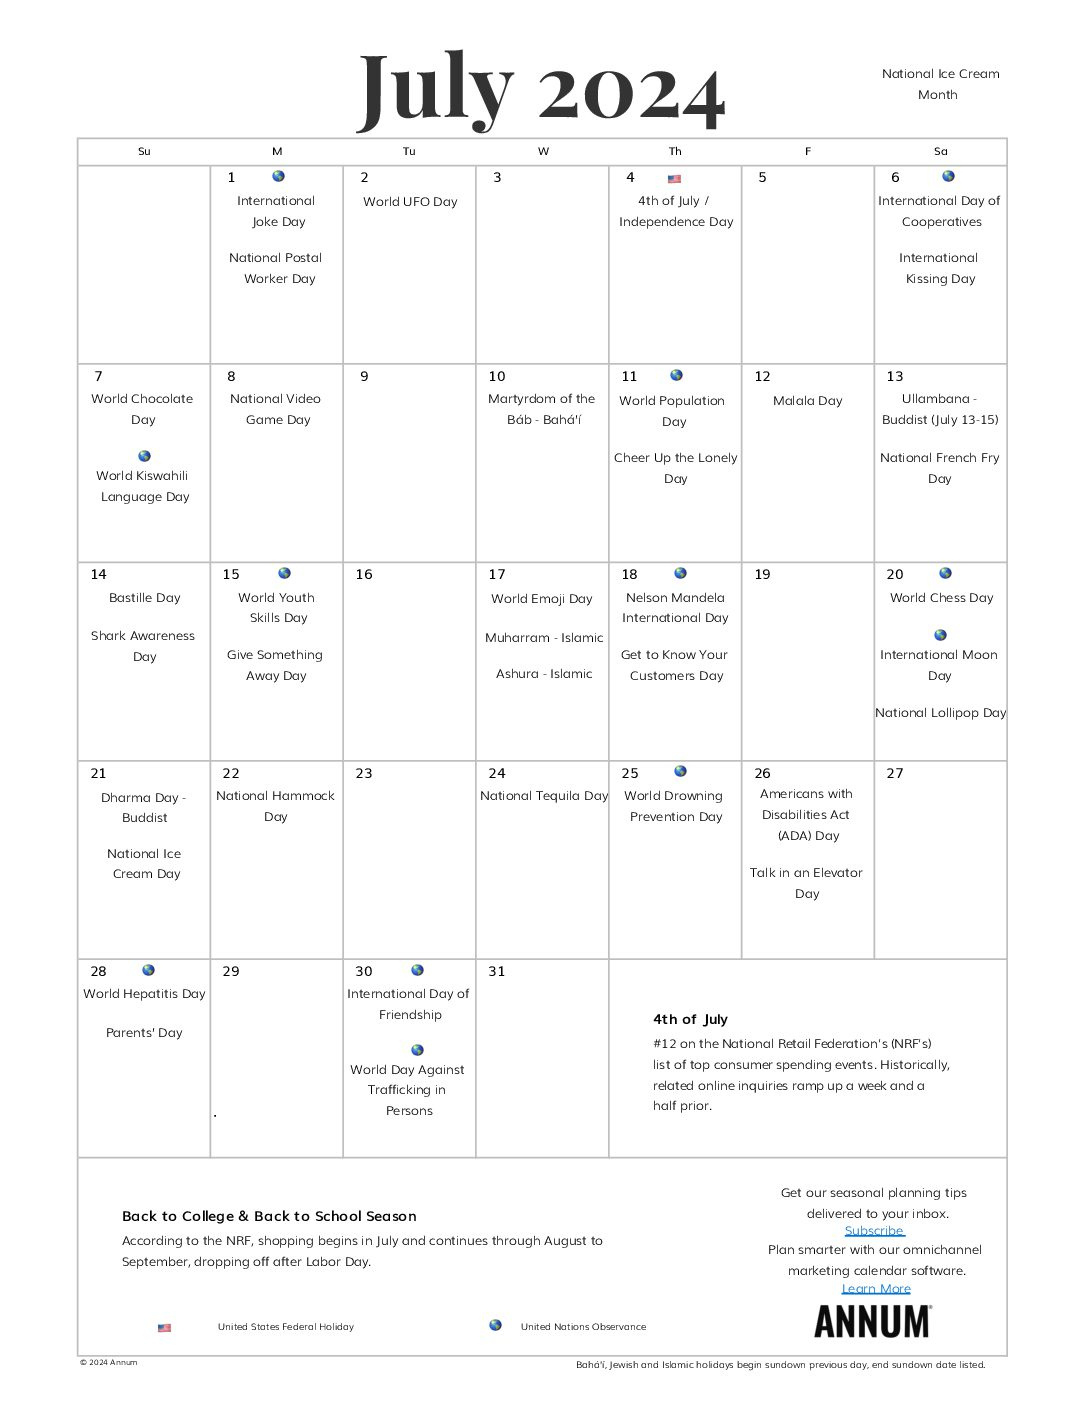 Printable July 2024 Calendar | July Holidays | Annum within July Calendar Events 2024